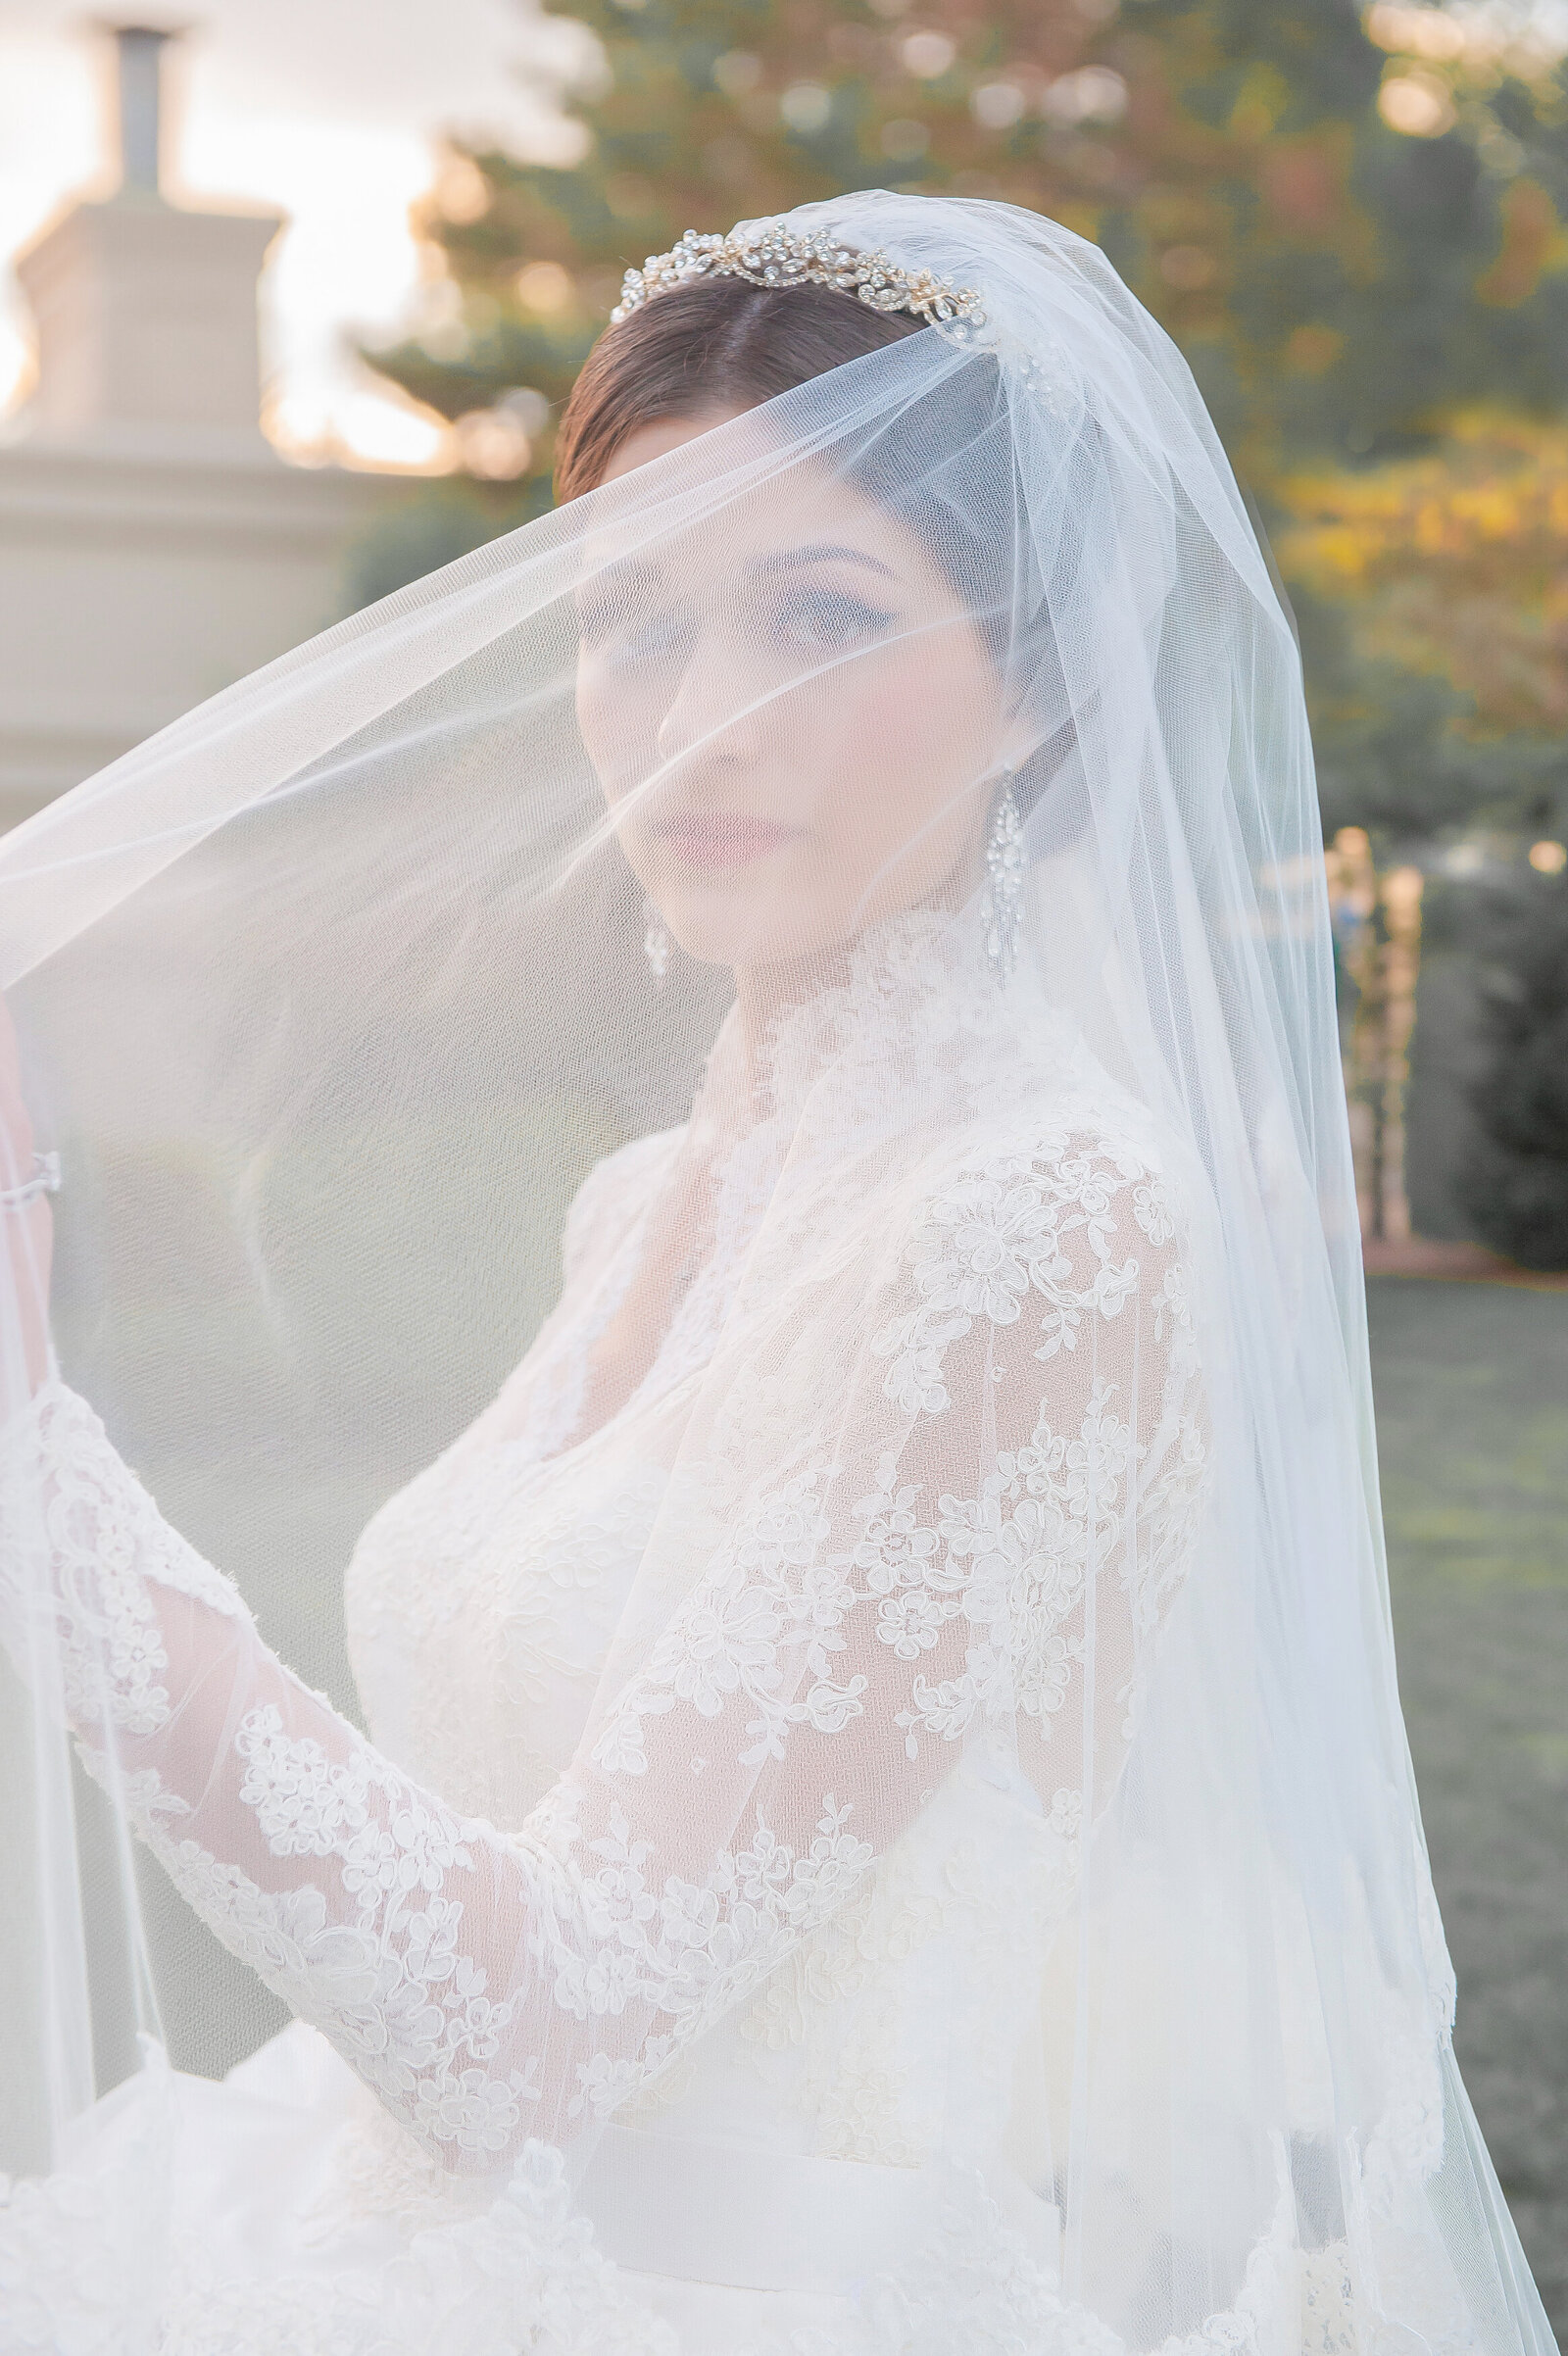 Bride looking out from under veil